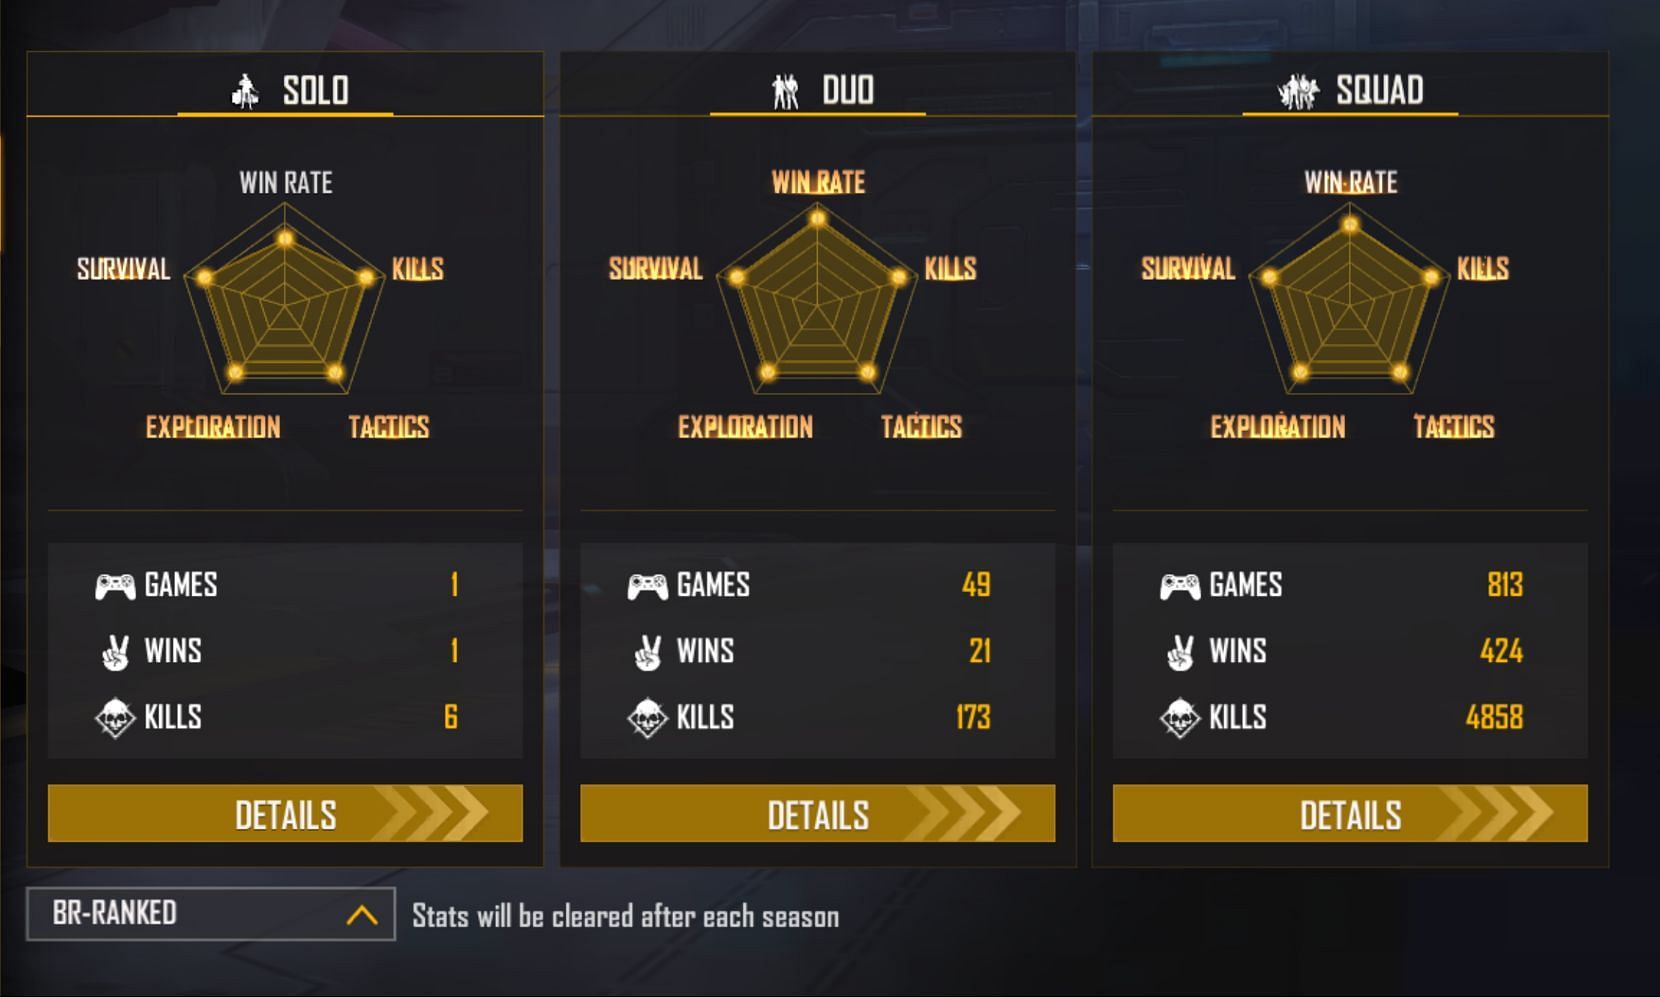 The YouTuber has more 50% win rate in squad matches (Image via Garena)